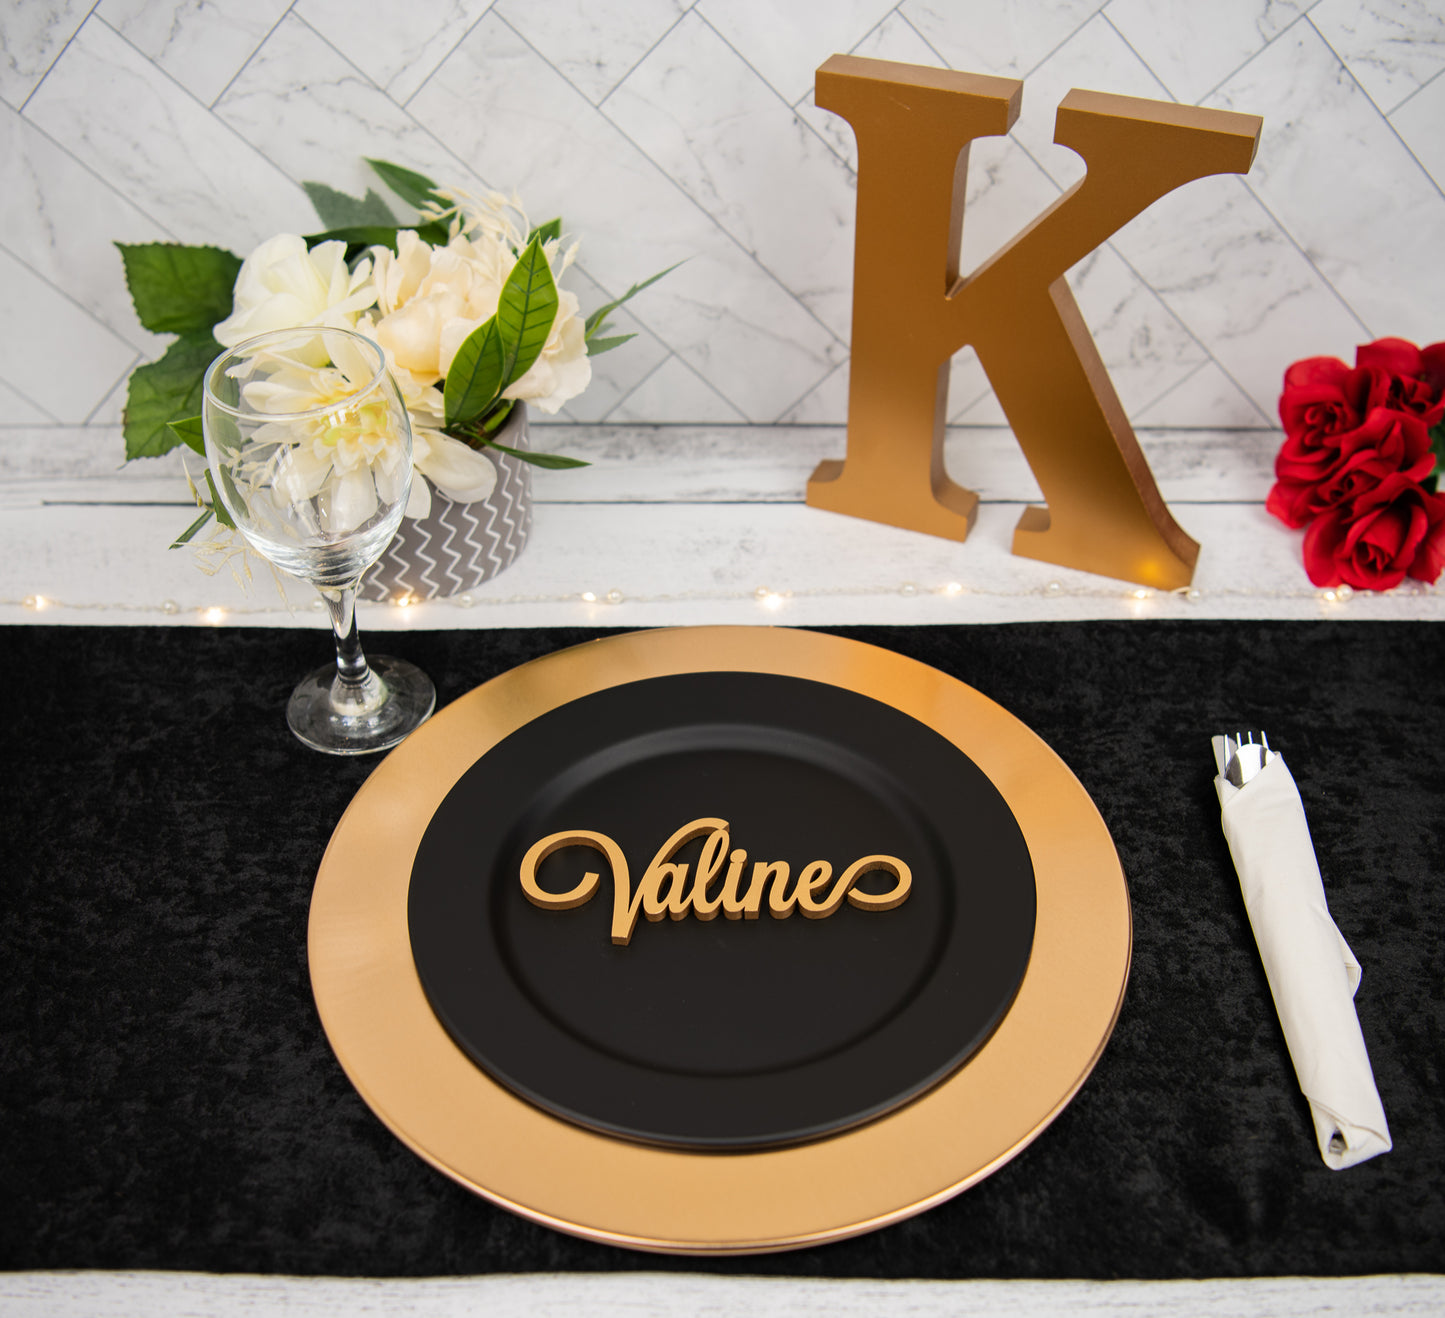 Custom Name Place Cards for Wedding Table Settings, Thanksgiving plate settings or any other special occasion event.